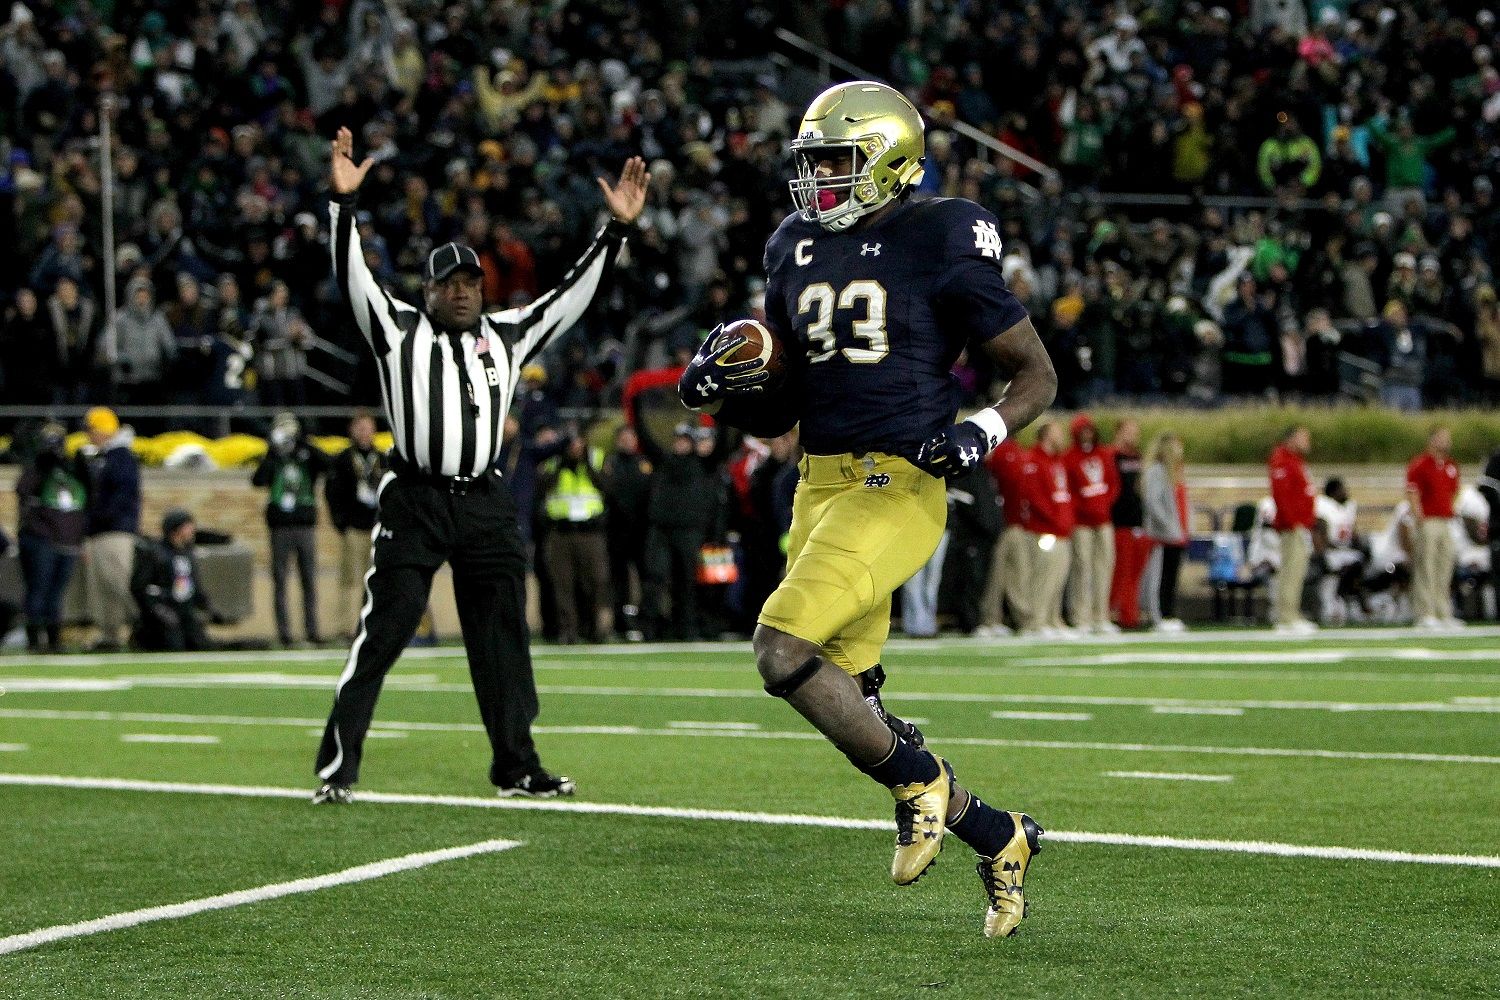 SOUTH BEND, IN - OCTOBER 28: Josh Adams #33 of the Notre Dame Fighting Irish scores a touchdown in the third quarter against the North Carolina State Wolfpack at Notre Dame Stadium on October 28, 2017 in South Bend, Indiana. (Photo by Dylan Buell/Getty Images)